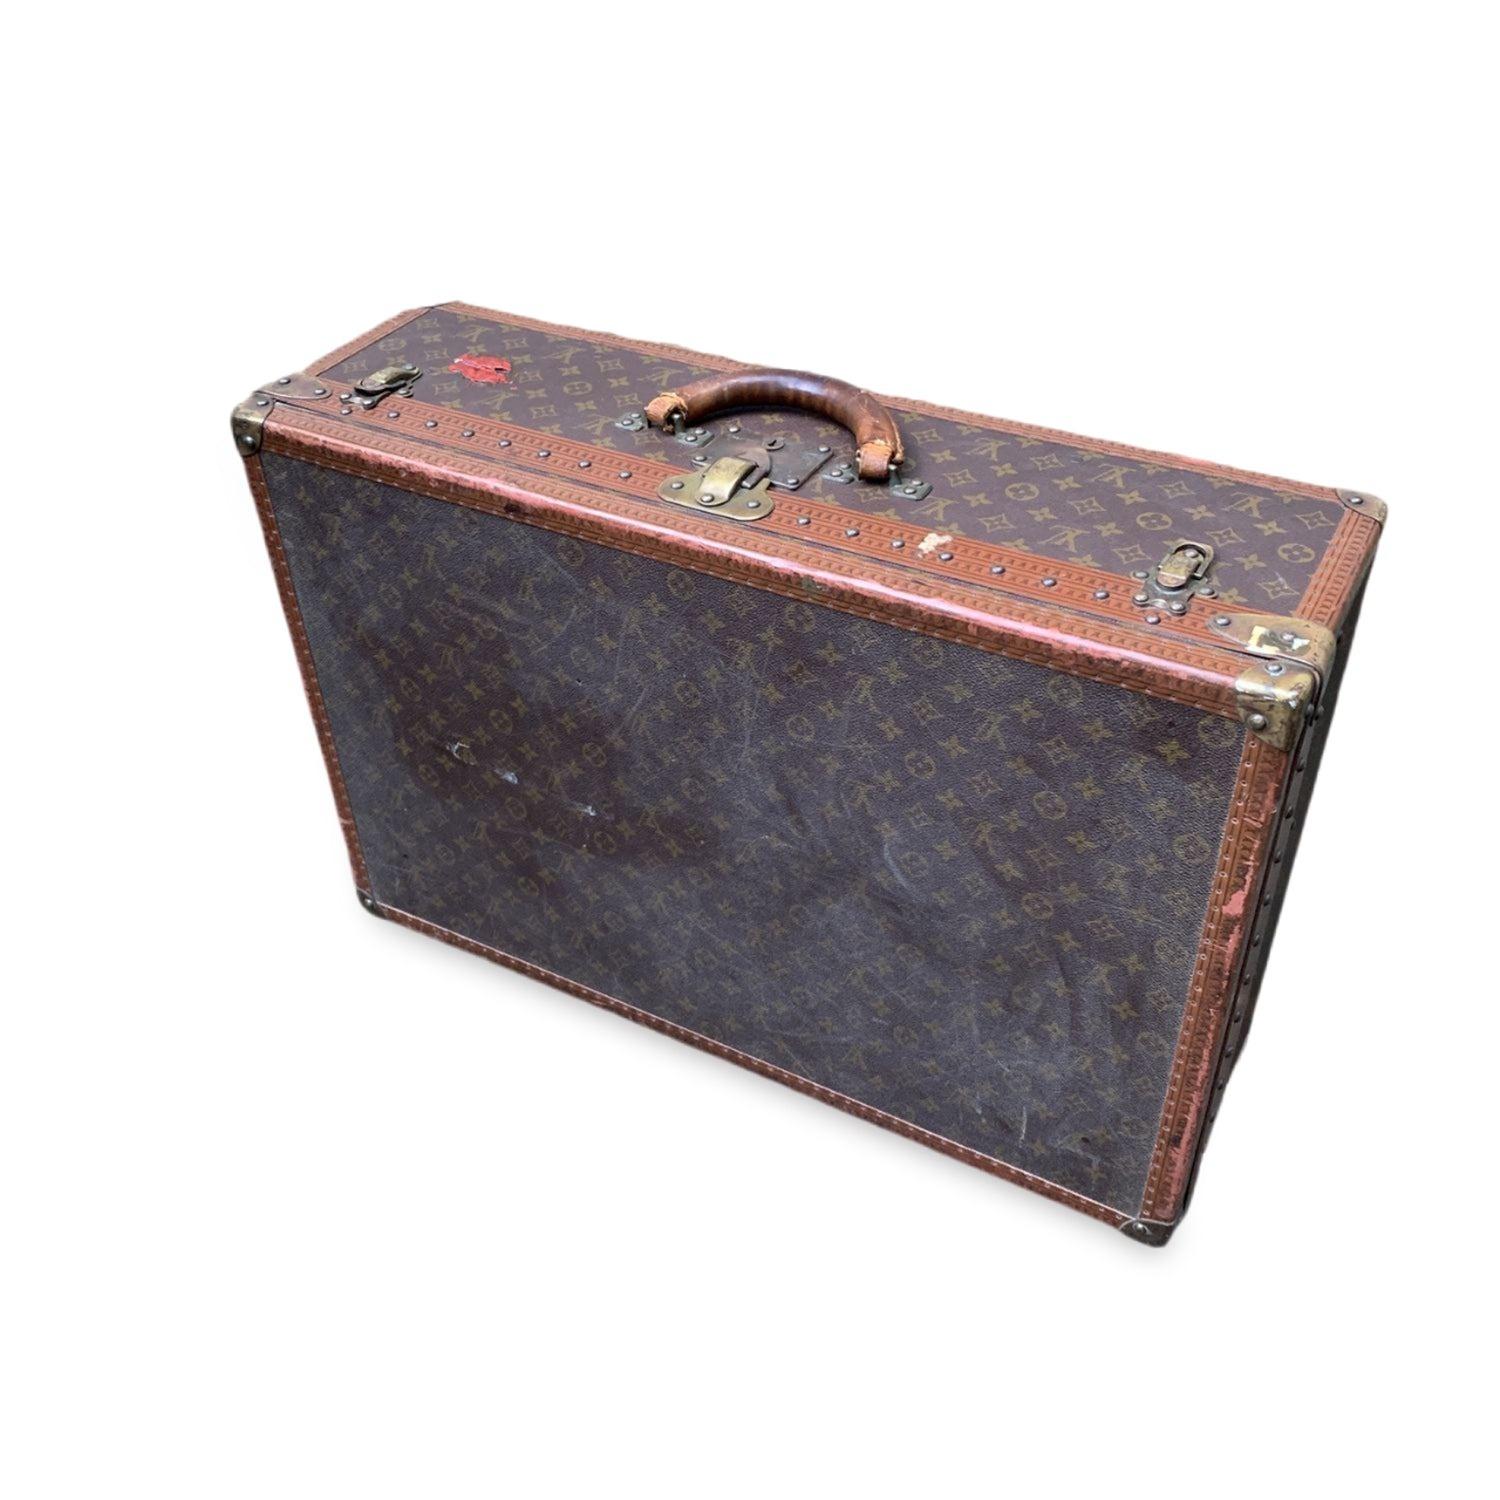 LOUIS VUITTON vintage Monogram Alzer 70 Suitcase, mod. M21226. A part of Louis Vuitton history, ideal for travel or for home or office decor. Monogram canvas with leather trim with embossed.LV logos. Rounded leather handle. Canvas interior.